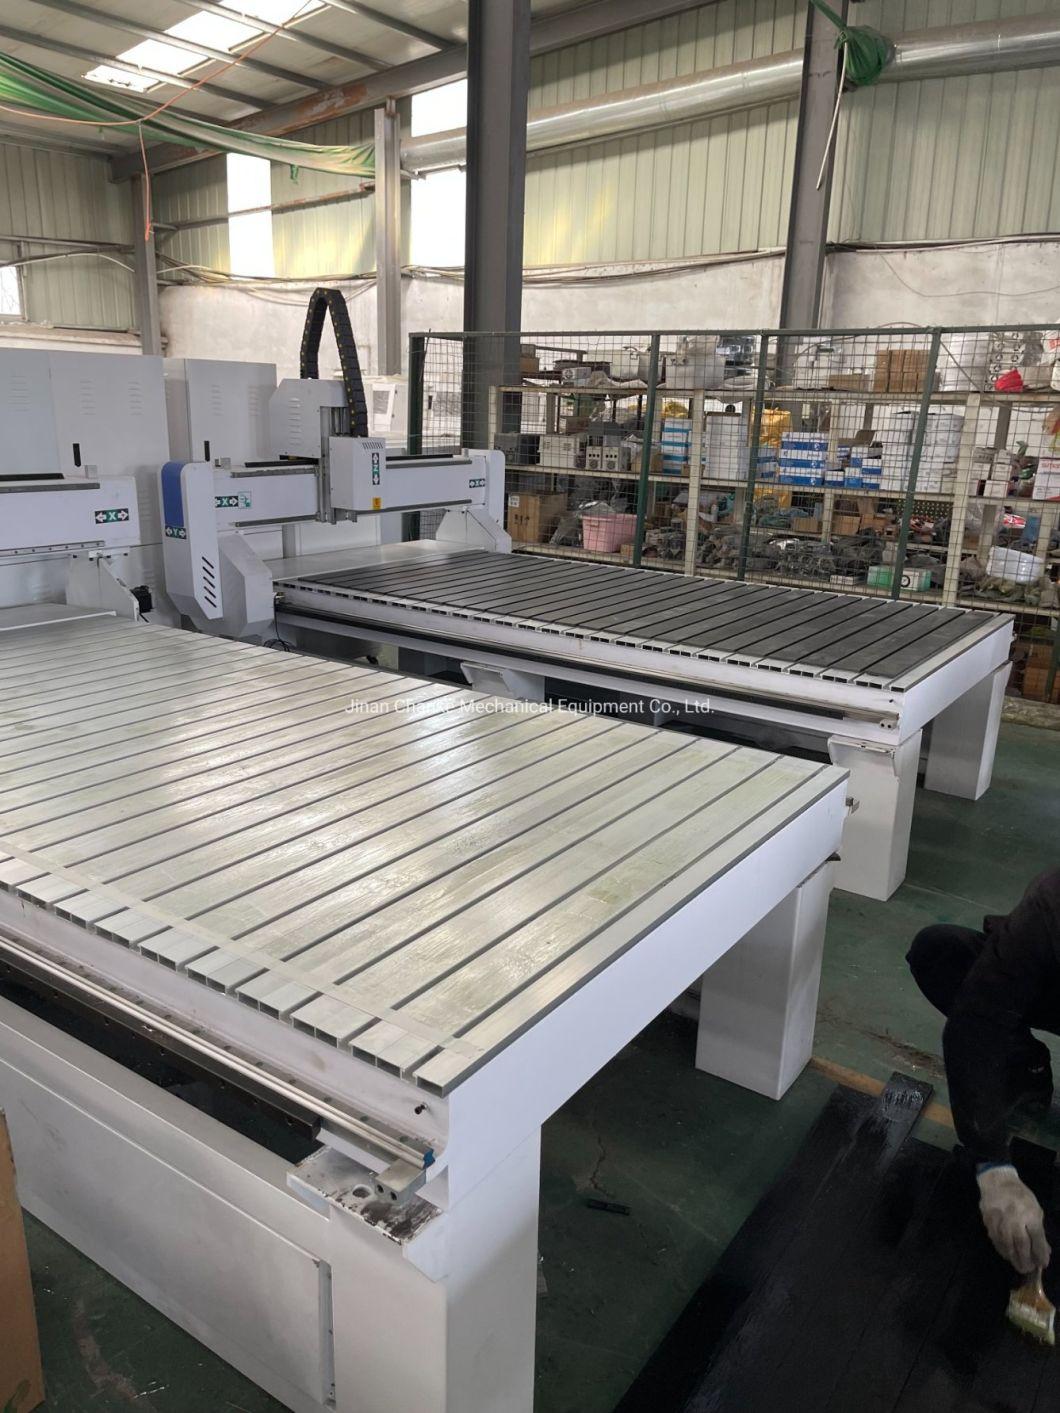 Economic Type Wood CNC Router Machine Furniture Crafts Engraving Cutting Machinery Carving 1300X2500mm Cabinet Woodworking